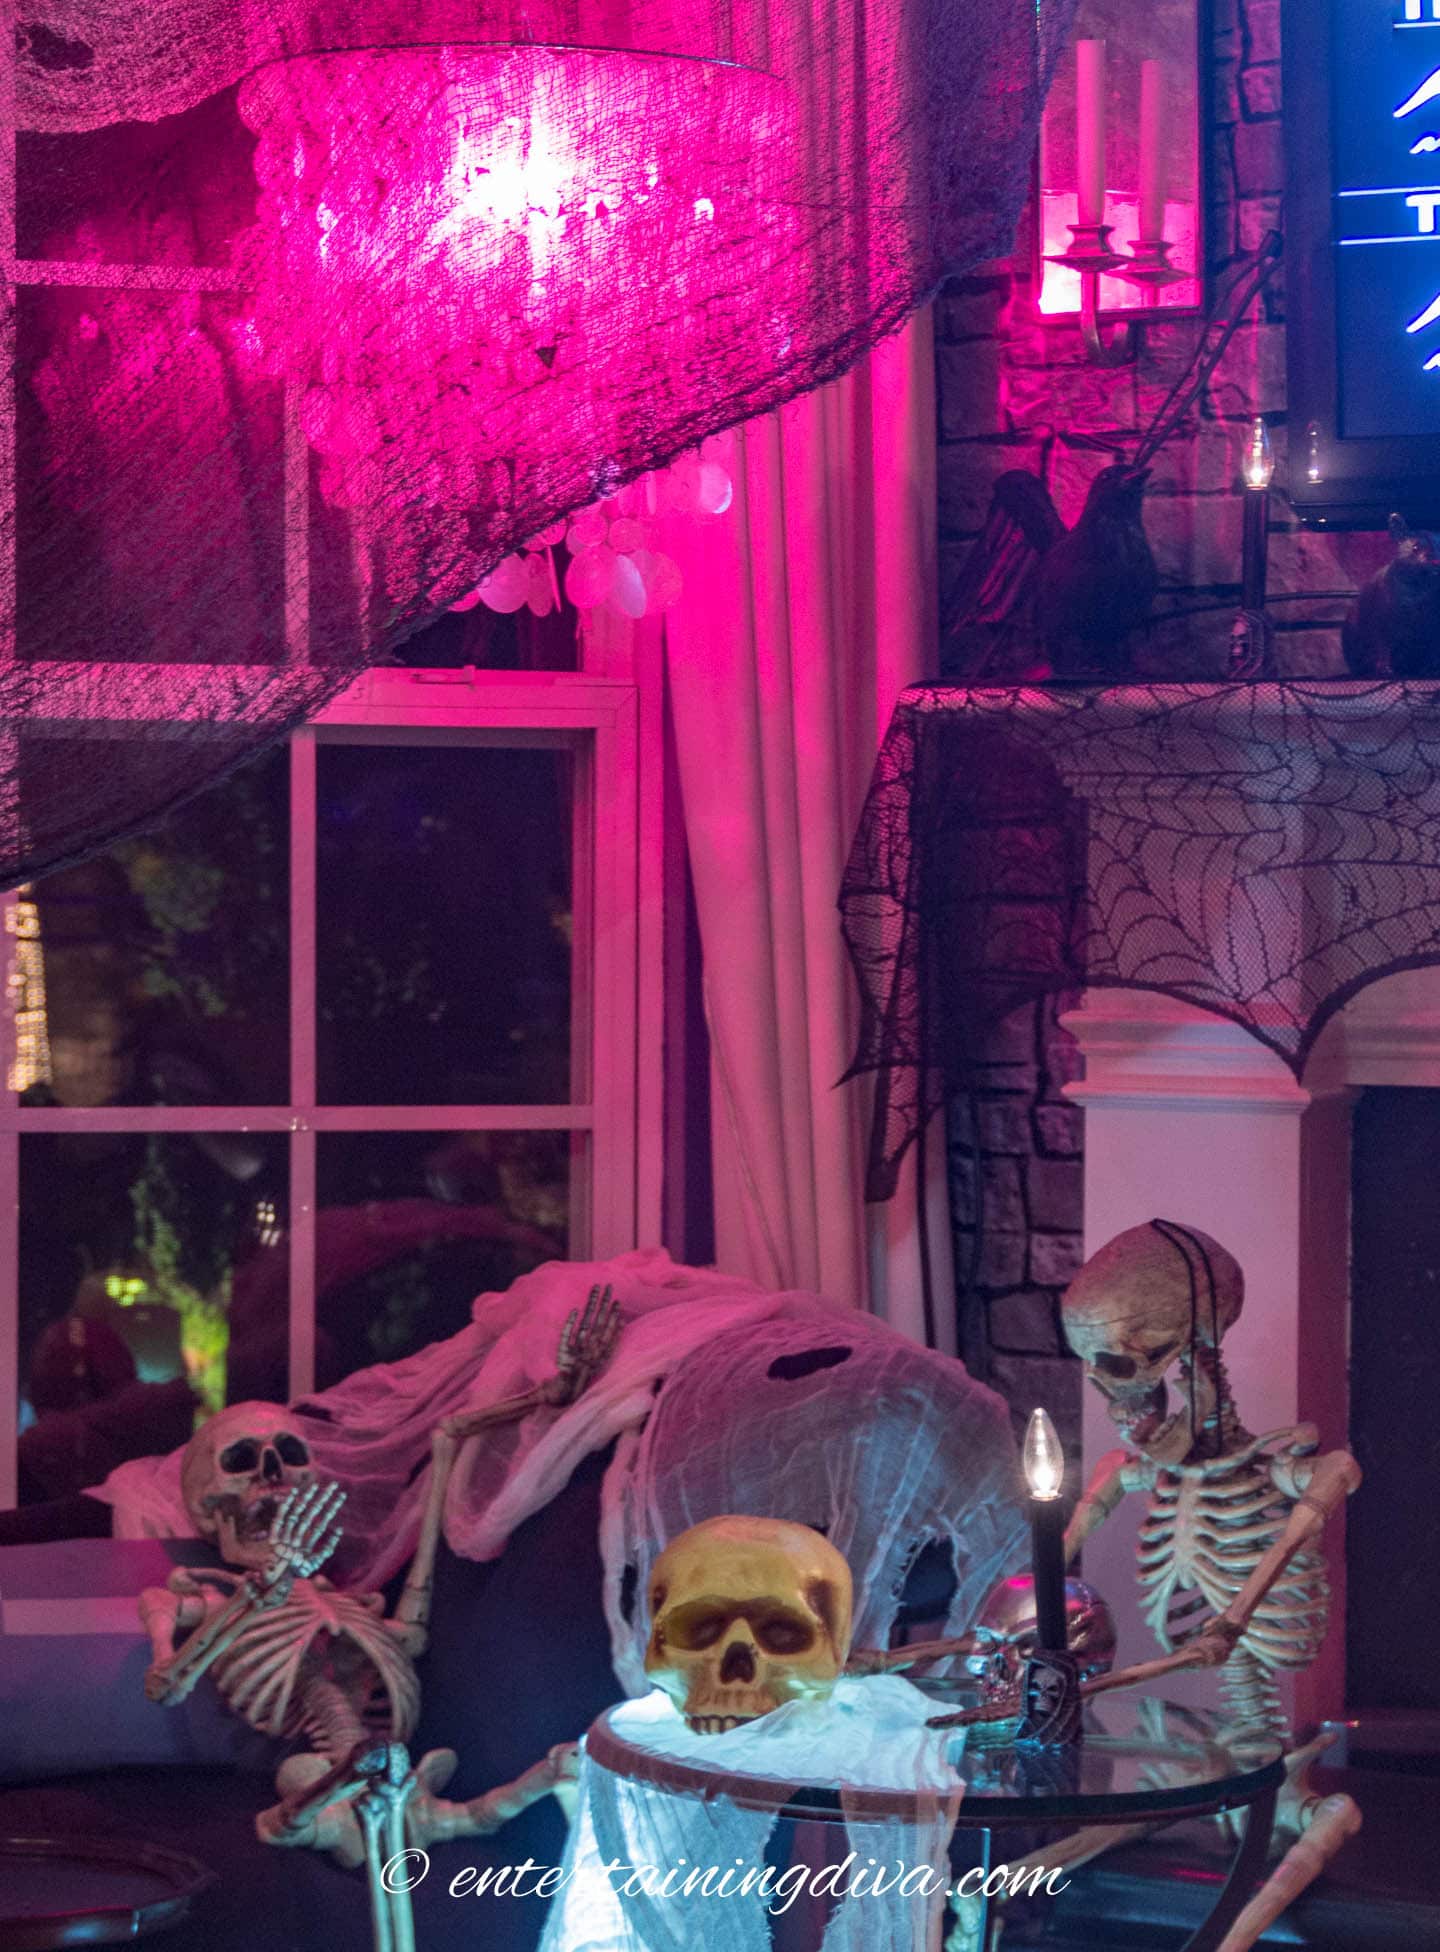 Skeletons sitting on a sofa covered in white creepy cloth in front of a window with black creepy cloth and a fireplace mantel with black lace